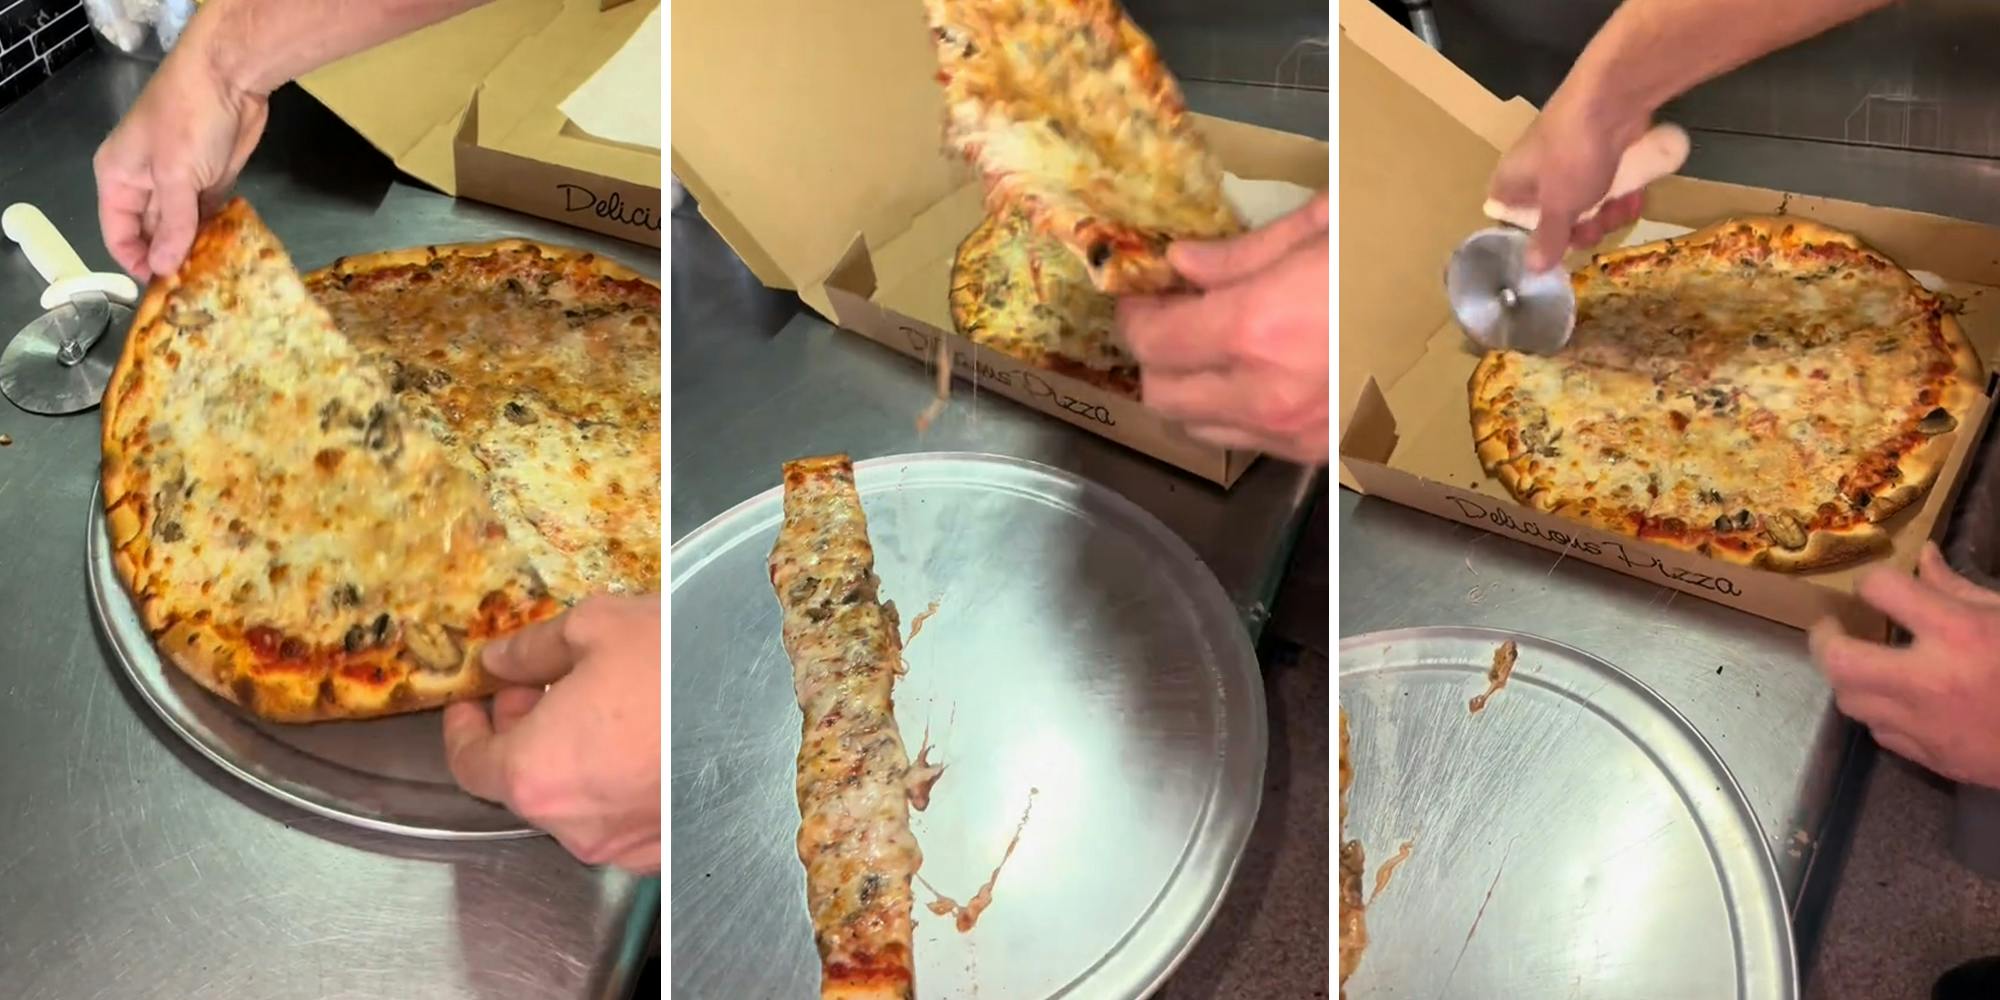 Pizza maker shares a sneaky hack that customers didn’t realize could happen to their pizzas